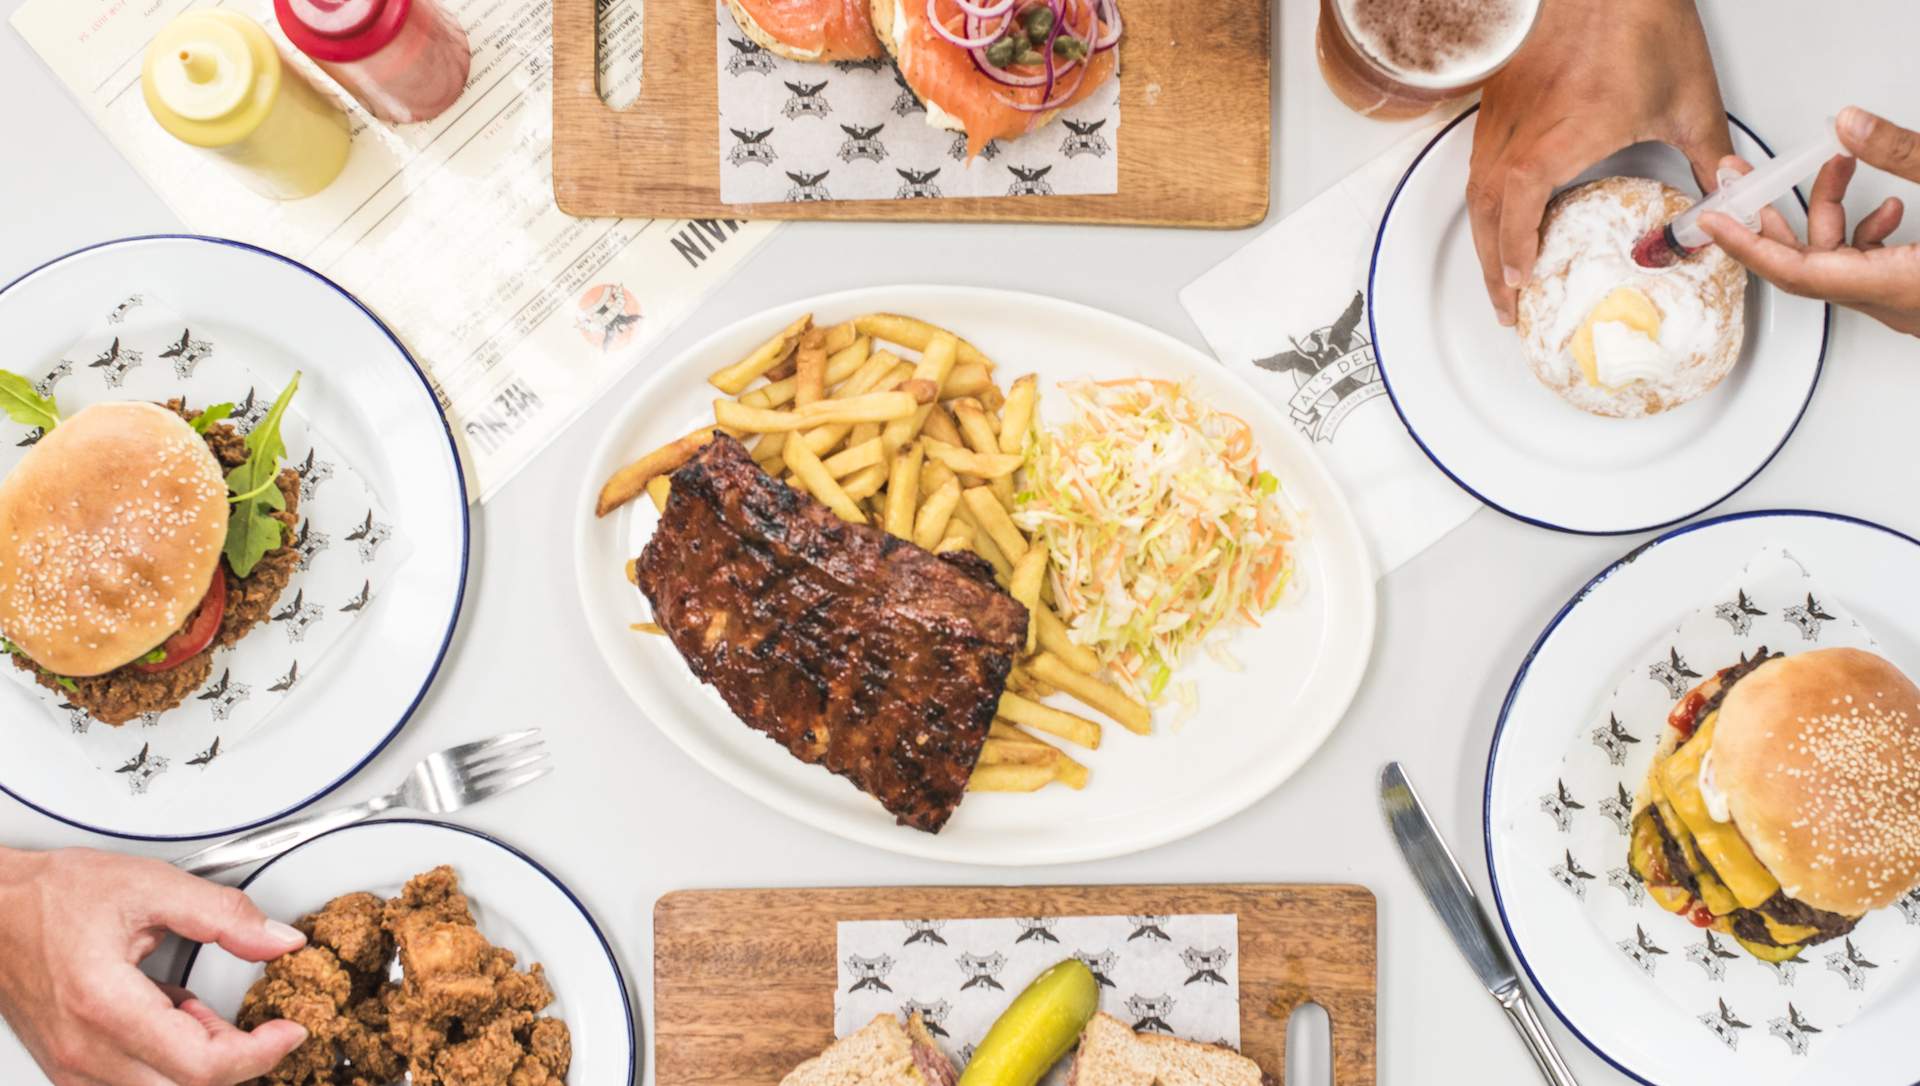 Uber is Launching Its Food Delivery Service UberEATS in Auckland